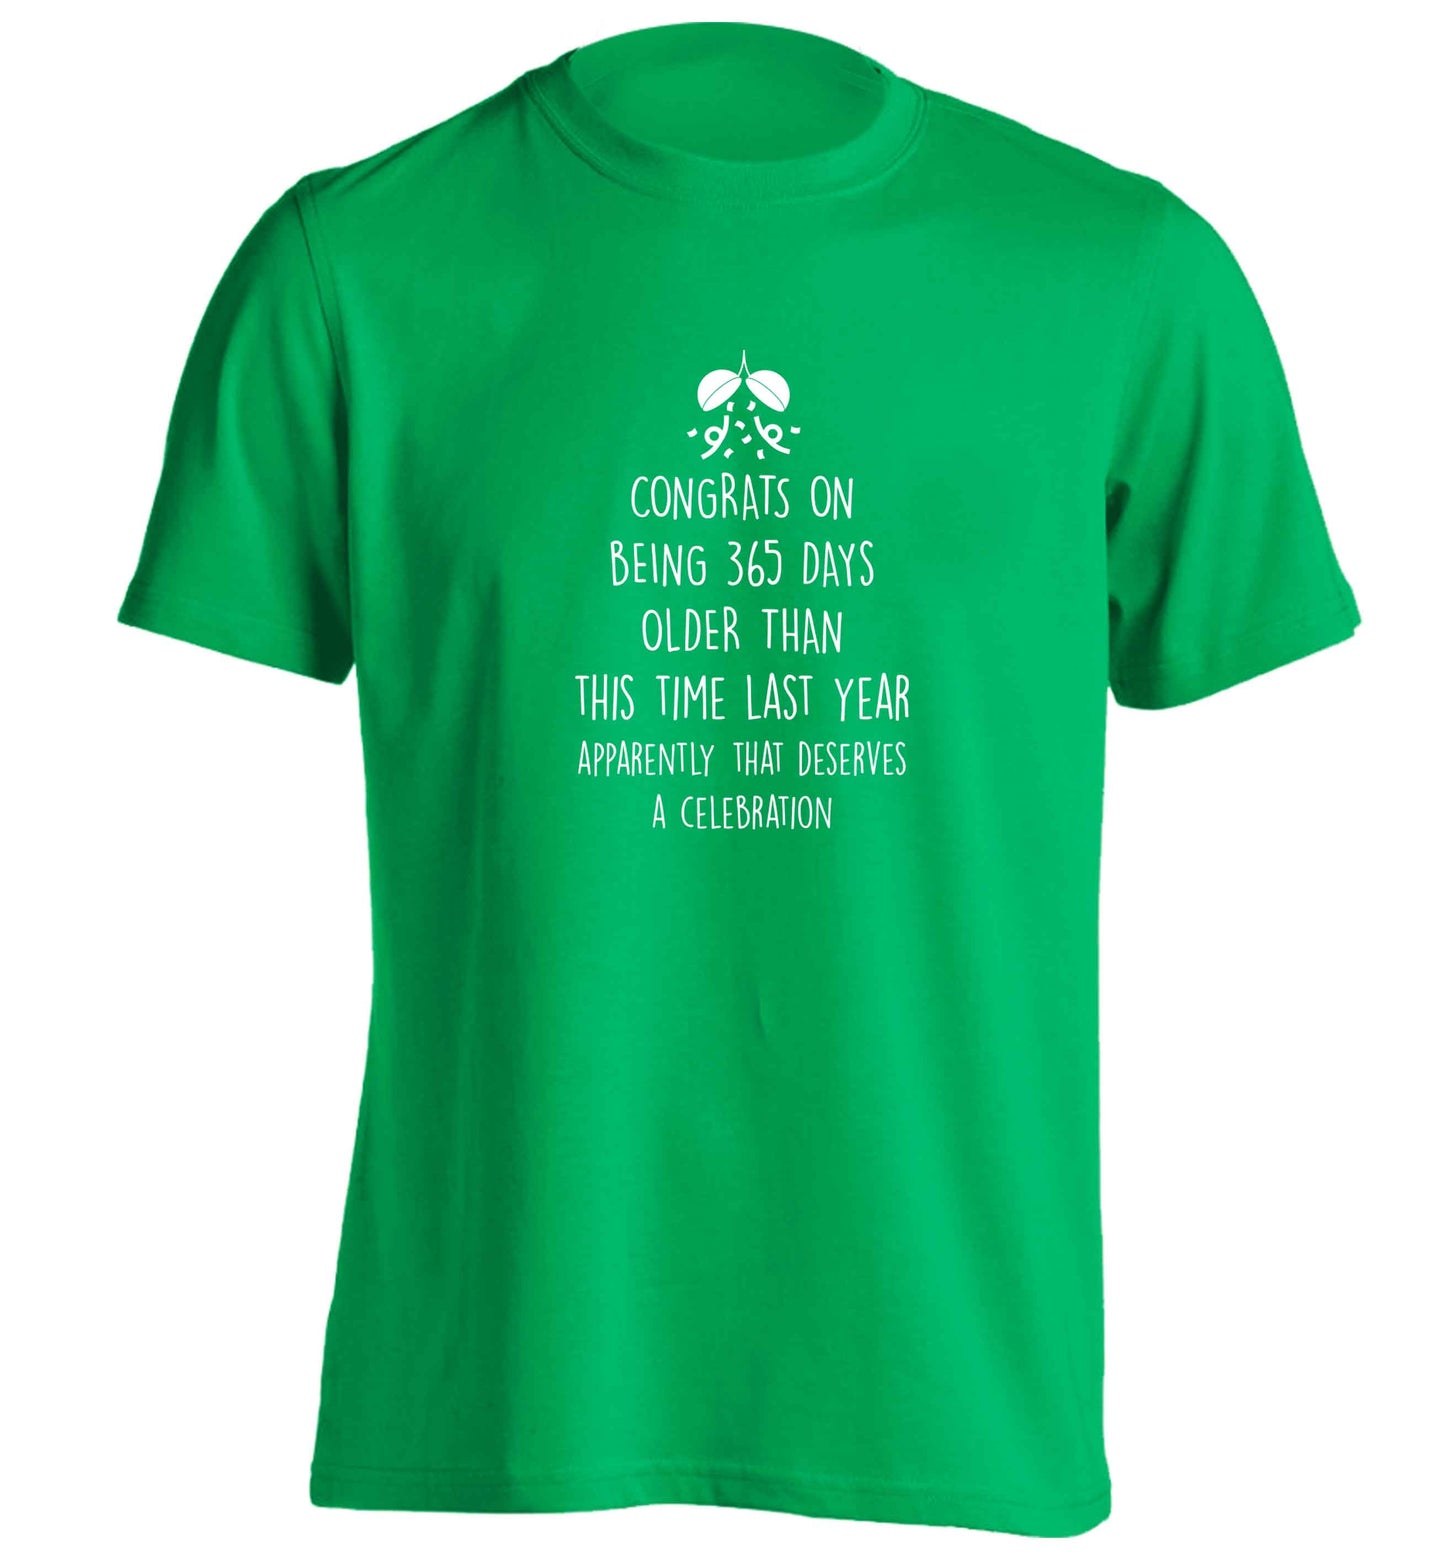 Congrats on being 365 days older than you were this time last year apparently that deserves a celebration adults unisex green Tshirt 2XL